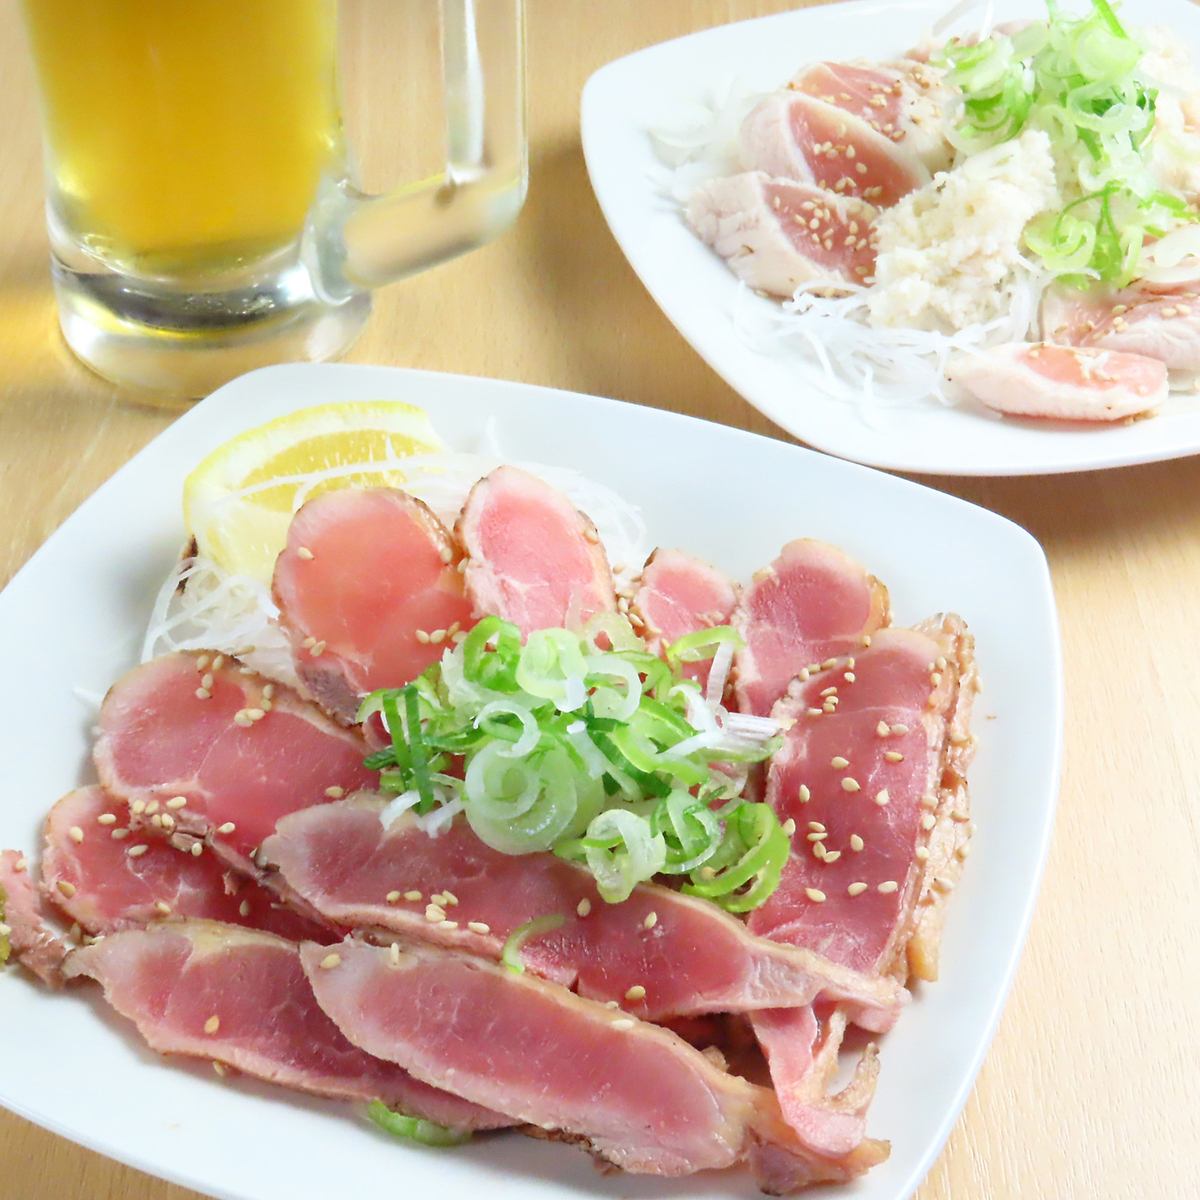 We offer unlimited all-you-can-drink for 2,970 yen. We also have course menus.